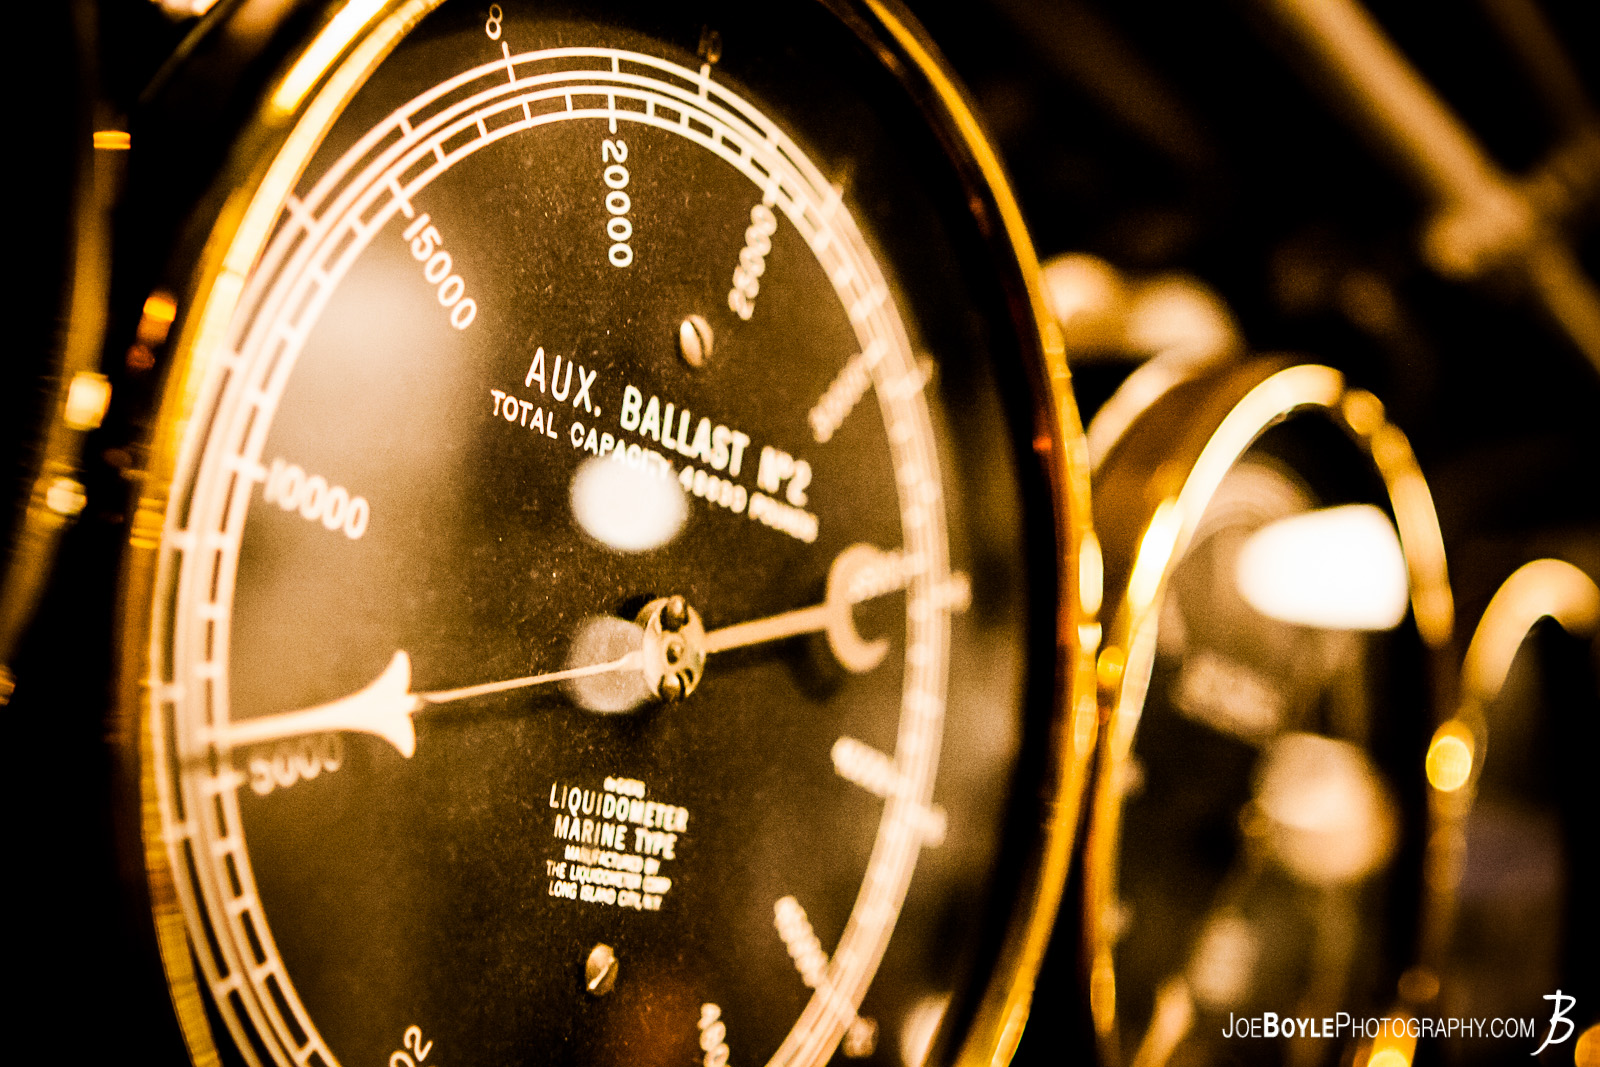  While on a trip to Hawaii I made a visit to Pearl Harbor on Oahu. I was able to capture a photo of this gauge while aboard the submarine. This vessel lived through a traumatic era of American History. 